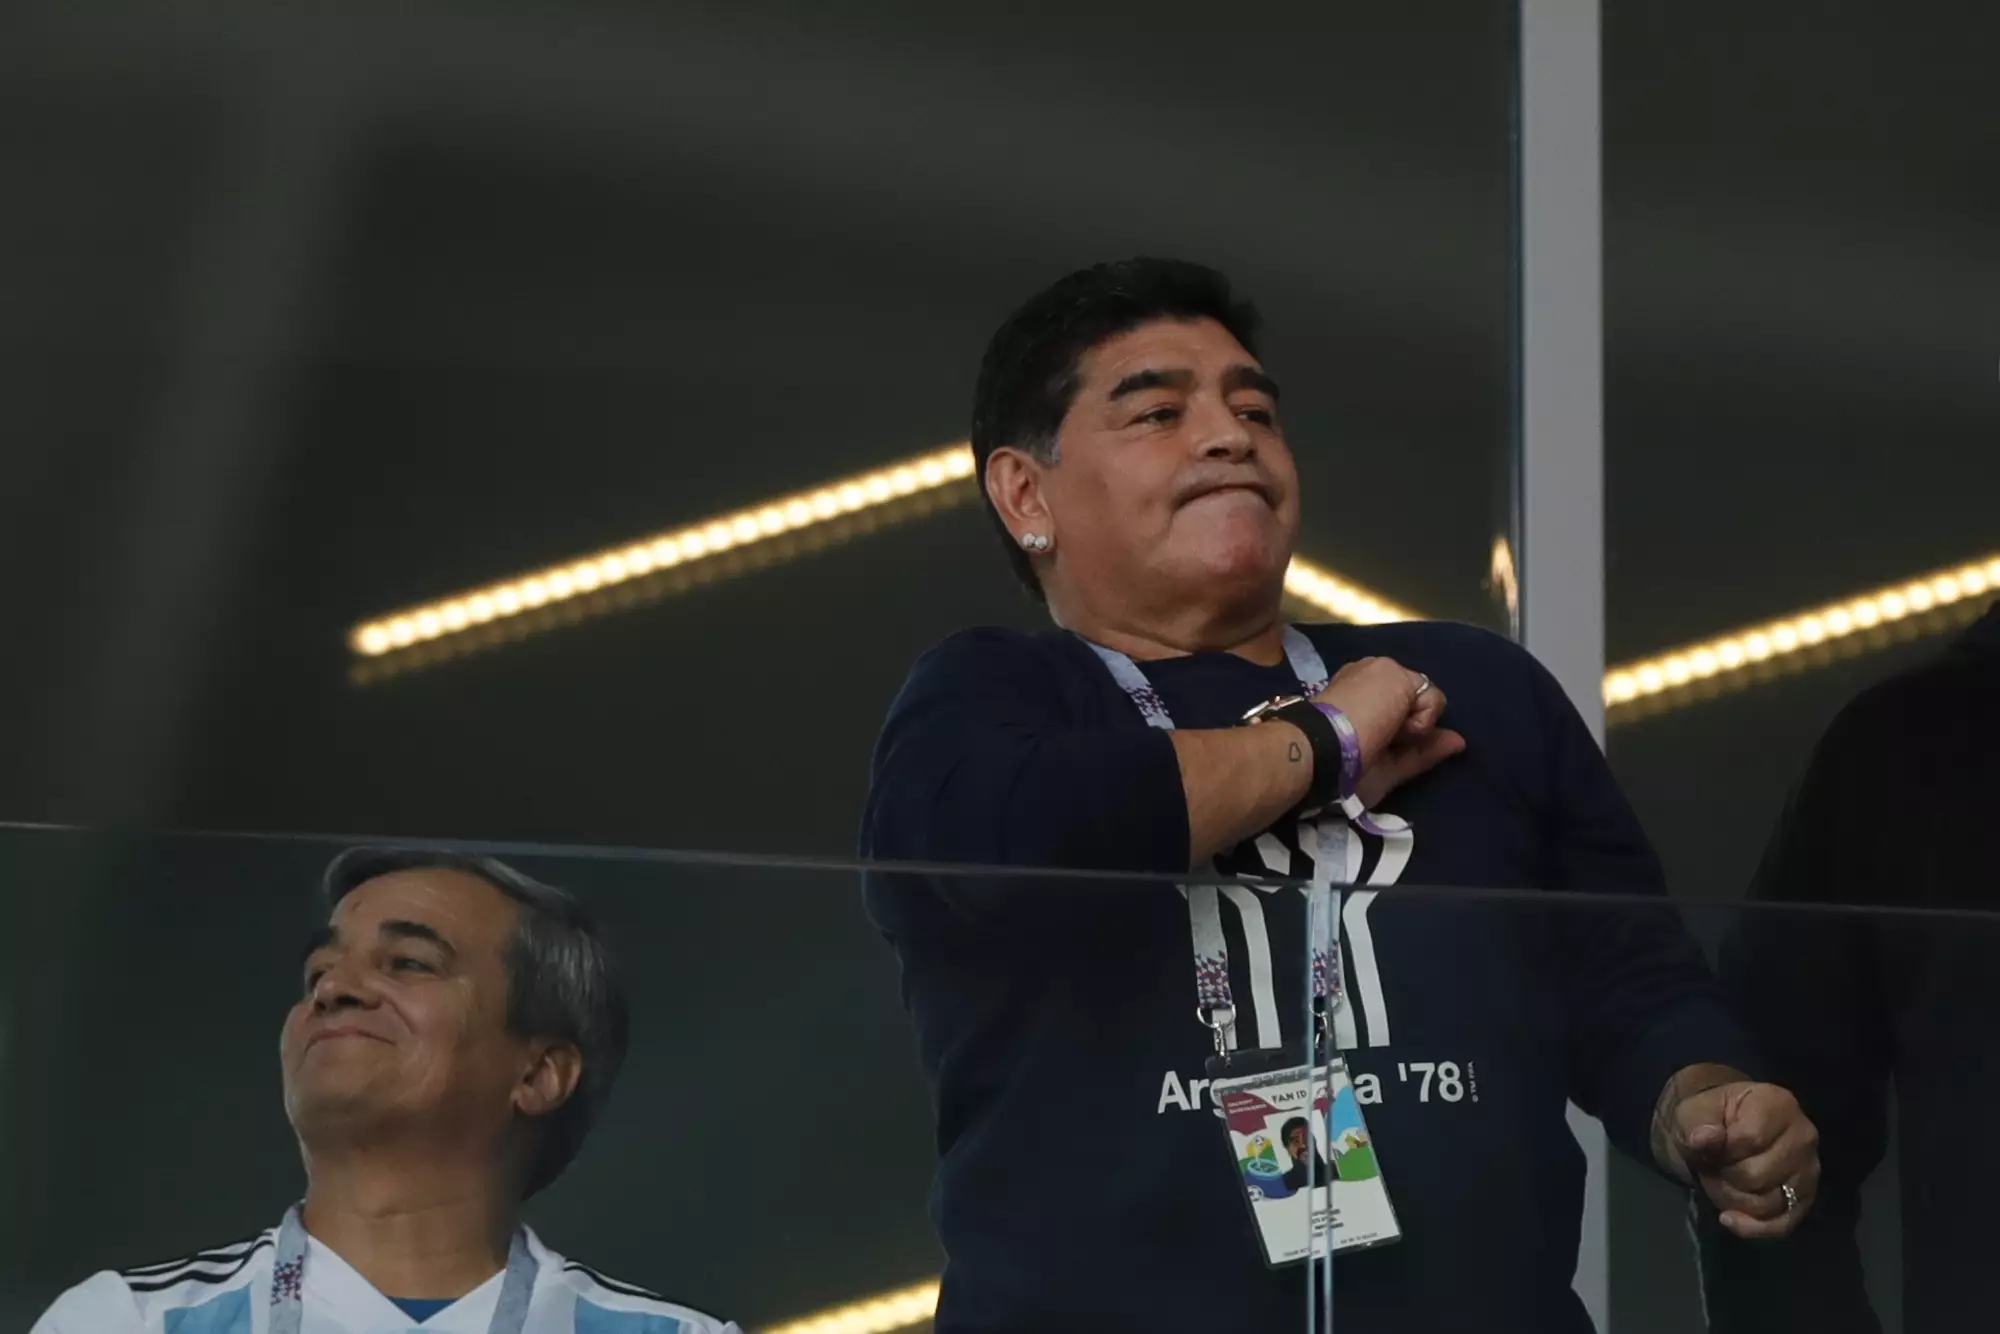 Maradona pounds his chest during Argentina game. Image: PA